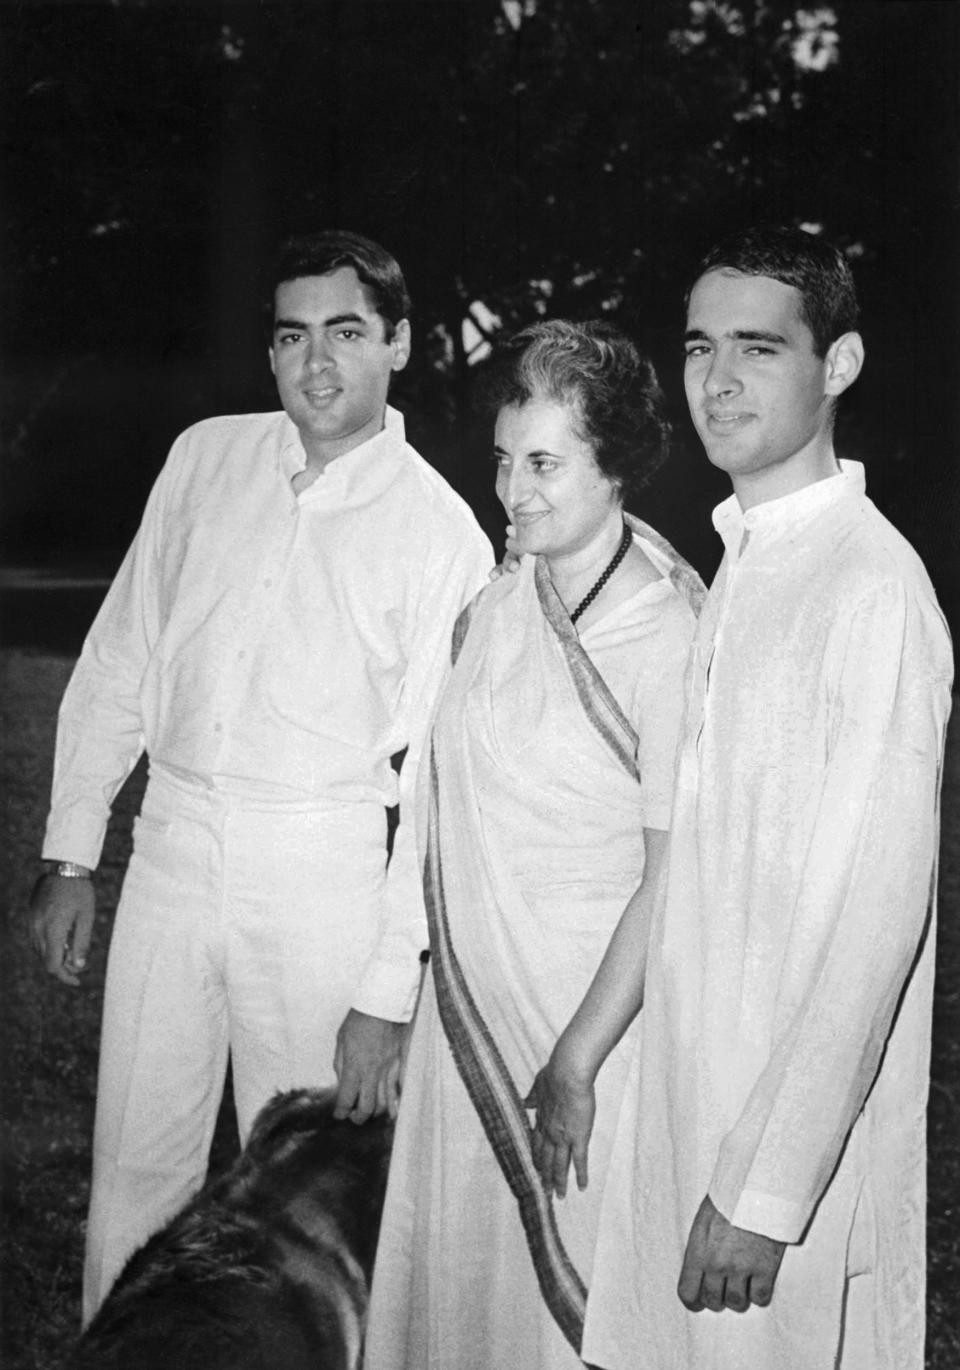 Rajiv Gandhi: The Prime Minister who only wanted to fly